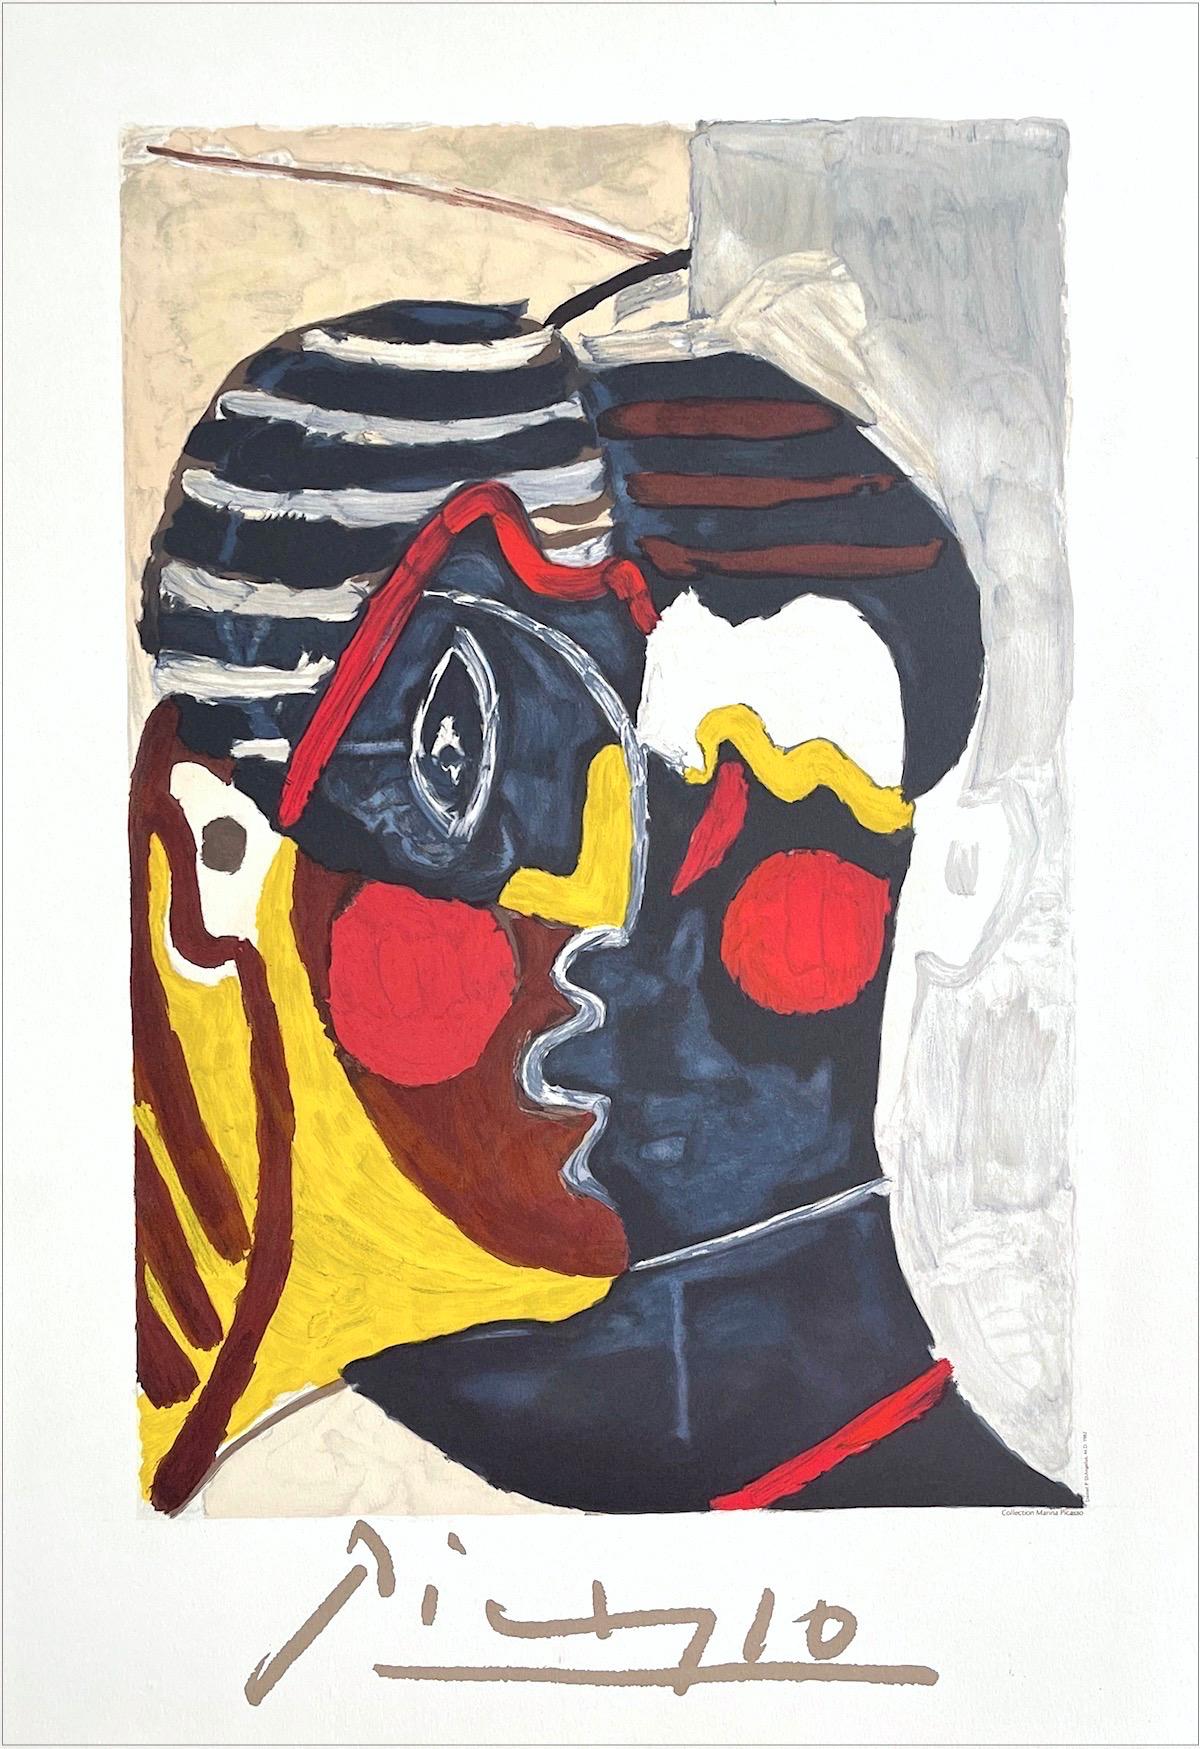 Abstract Print (after) Pablo Picasso - Paulo en Costume d'Arlequin, lithographie, visages abstraits, masque africain, rayures